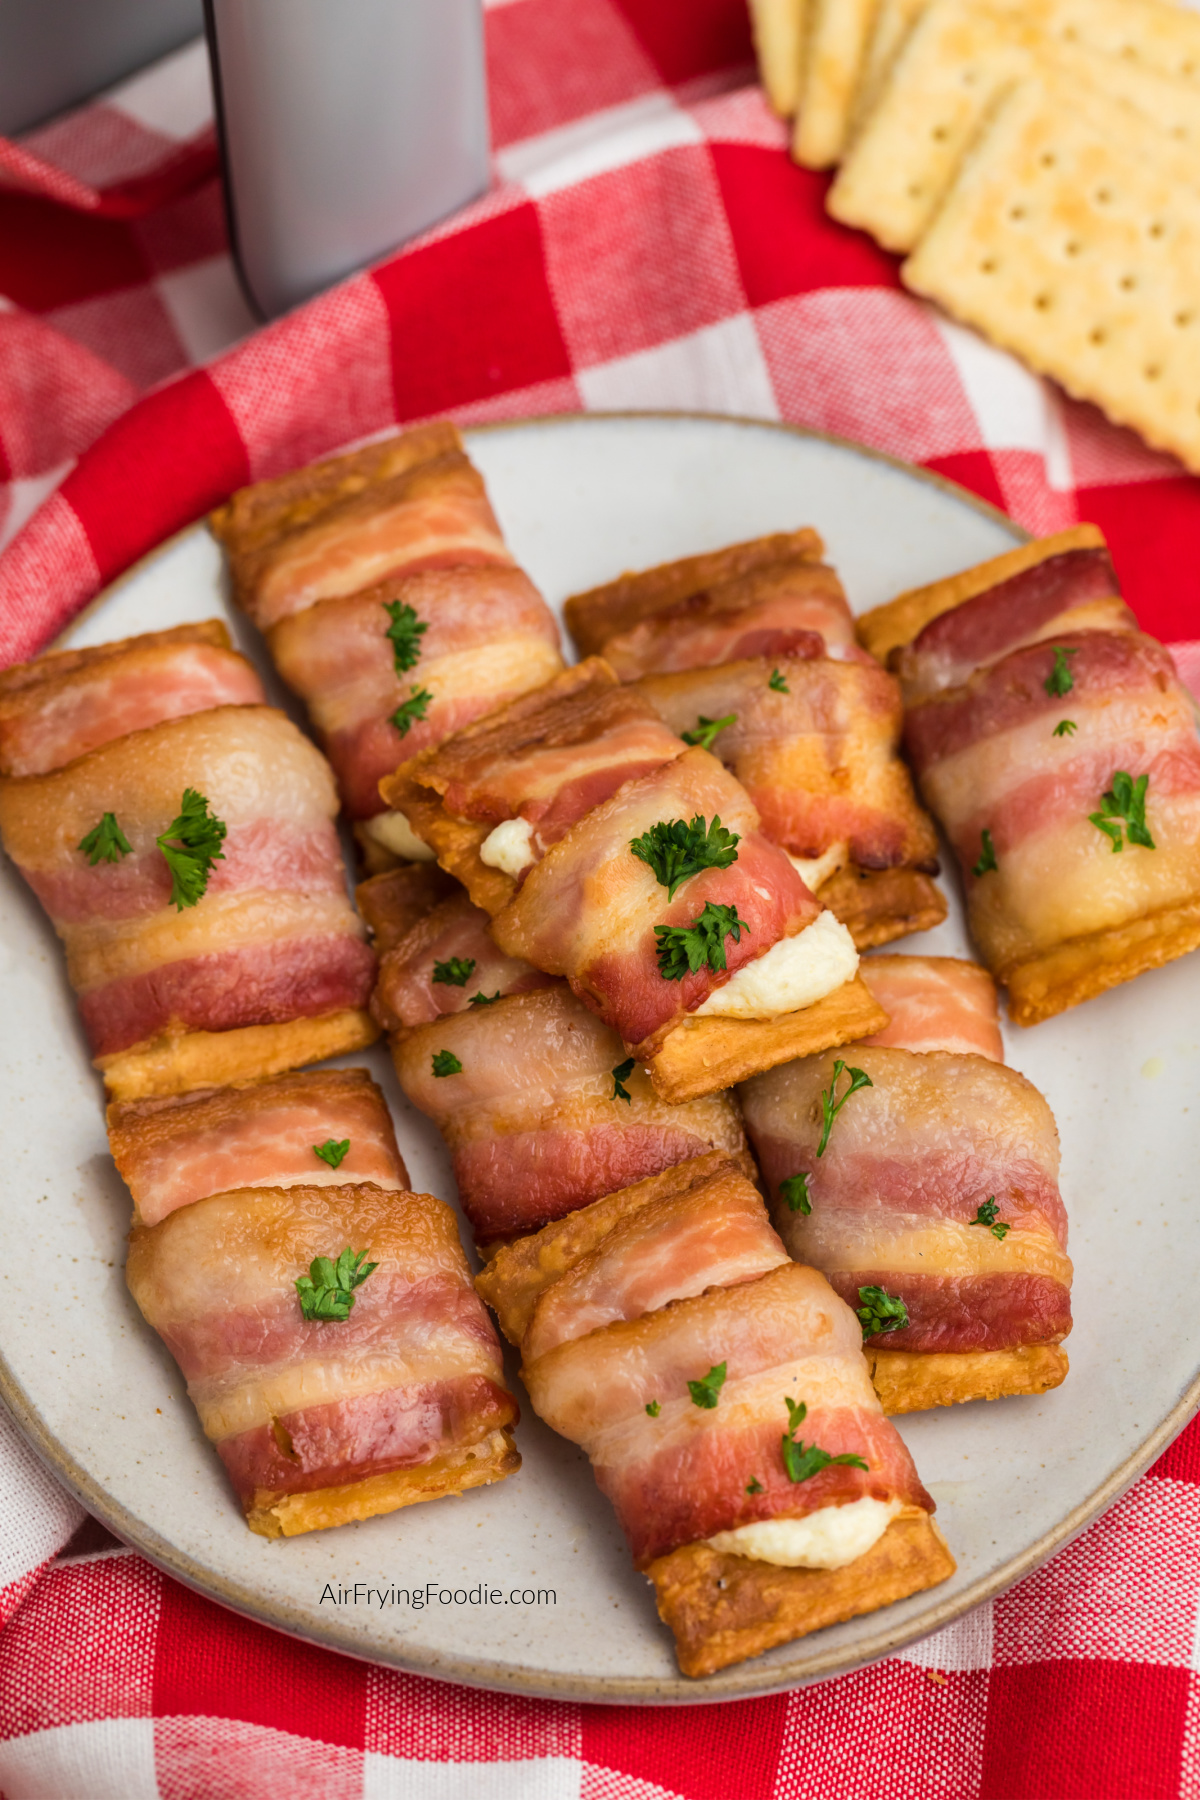 Bacon wrapped cream cheese crackers on a plate, ready to serve.